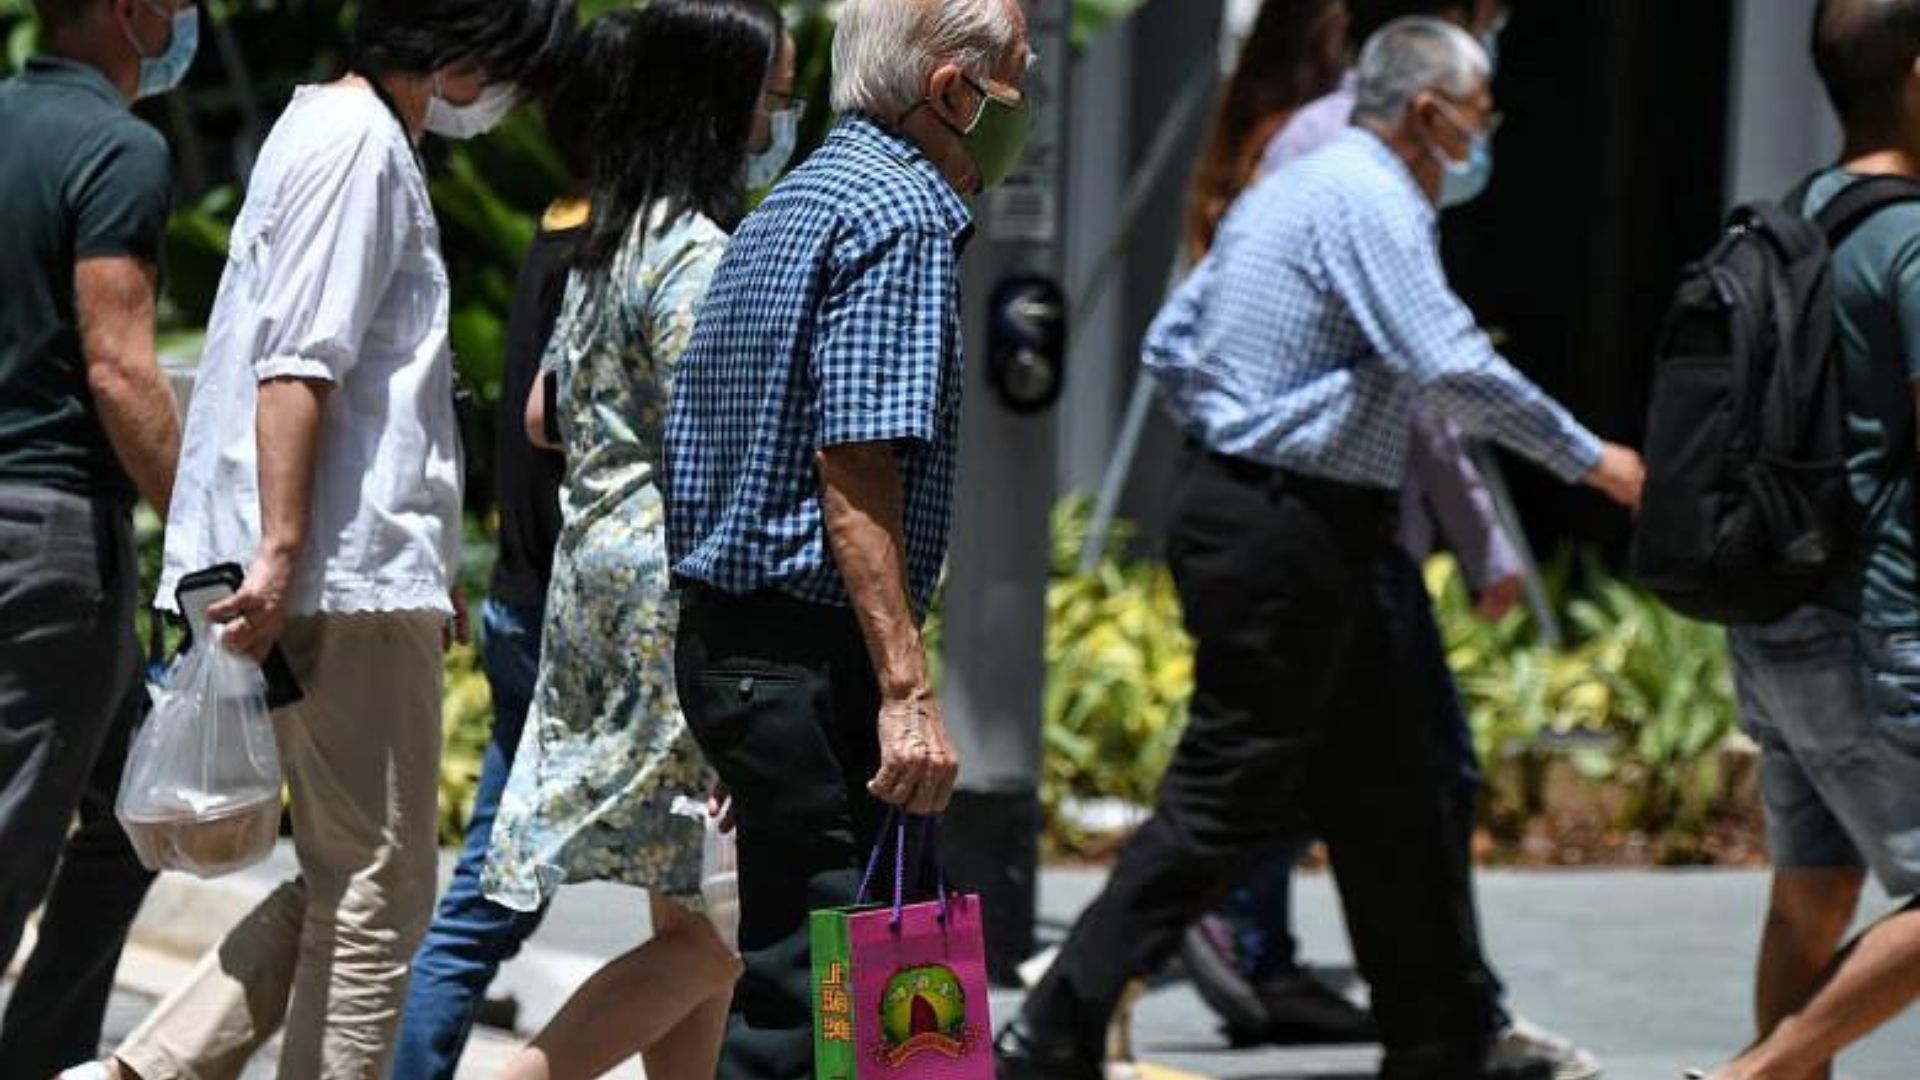 Ageing in place: Are our elderly financially secure enough to do so?